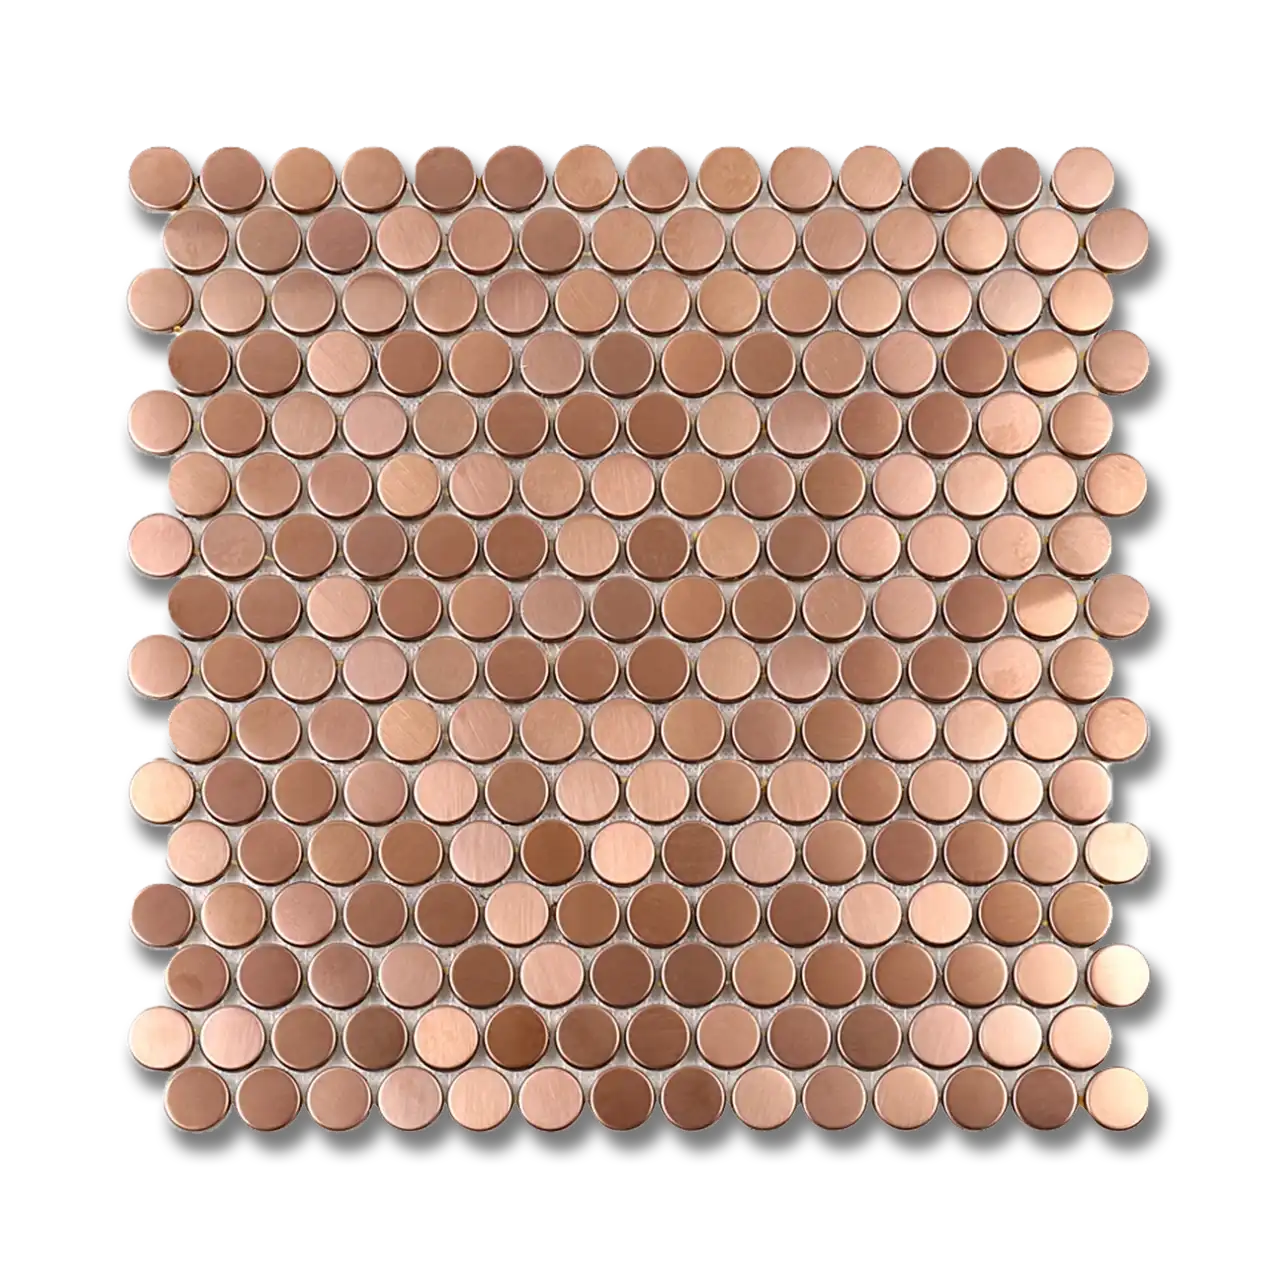 Metals Rose Gold Penny Round Brushed Aluminum Mosaic Tile